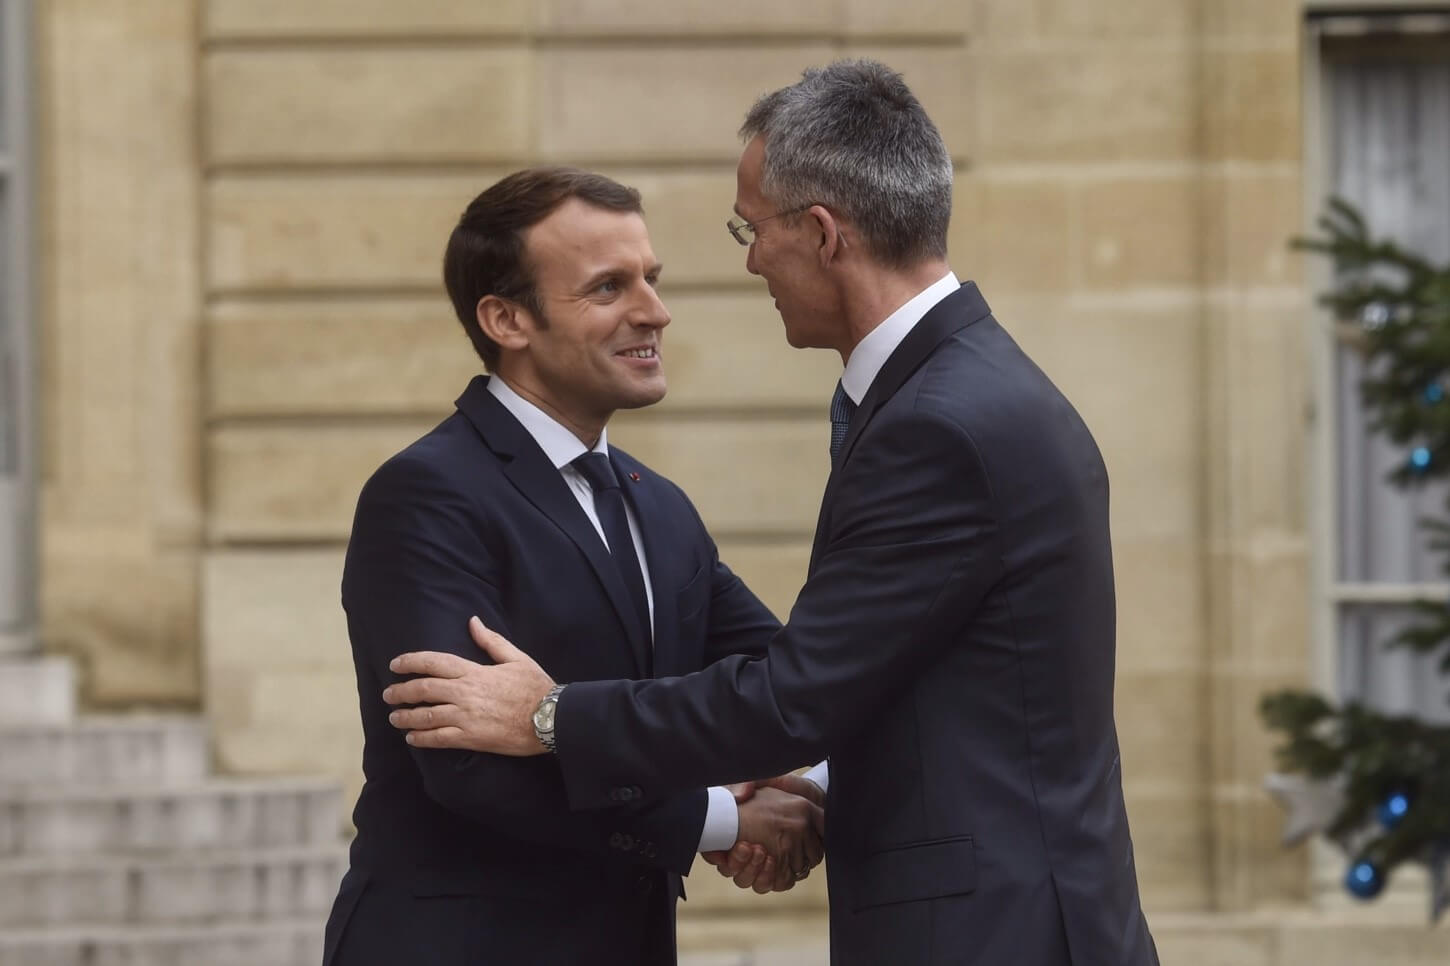 Bouemar - NATO Secretary General Jens Stoltenberg meets with the President of the French Republic, Emmanuel Macron in 2017. NATO